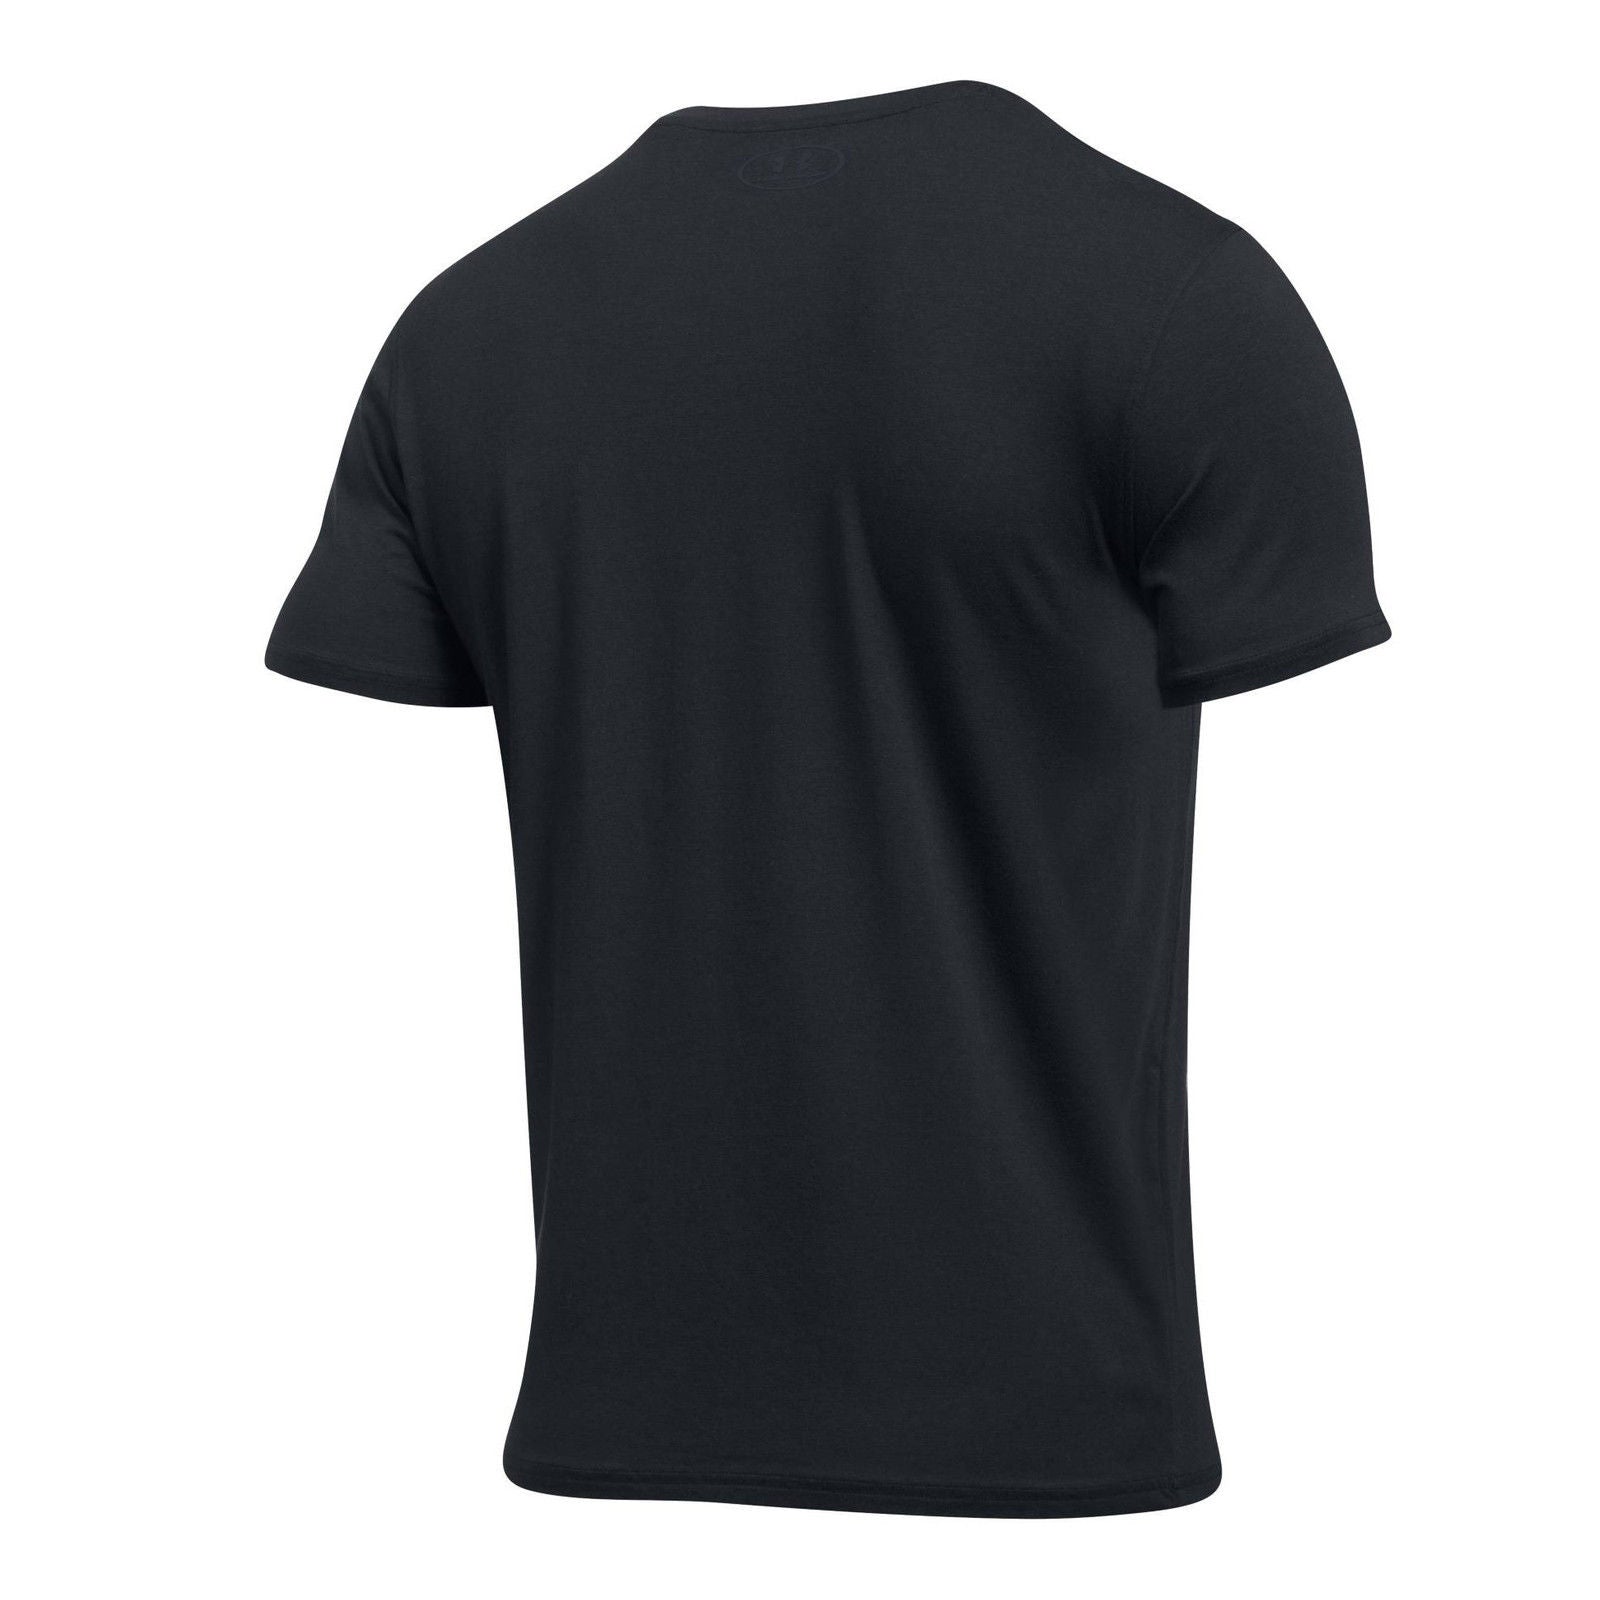 under armour t shirt pack